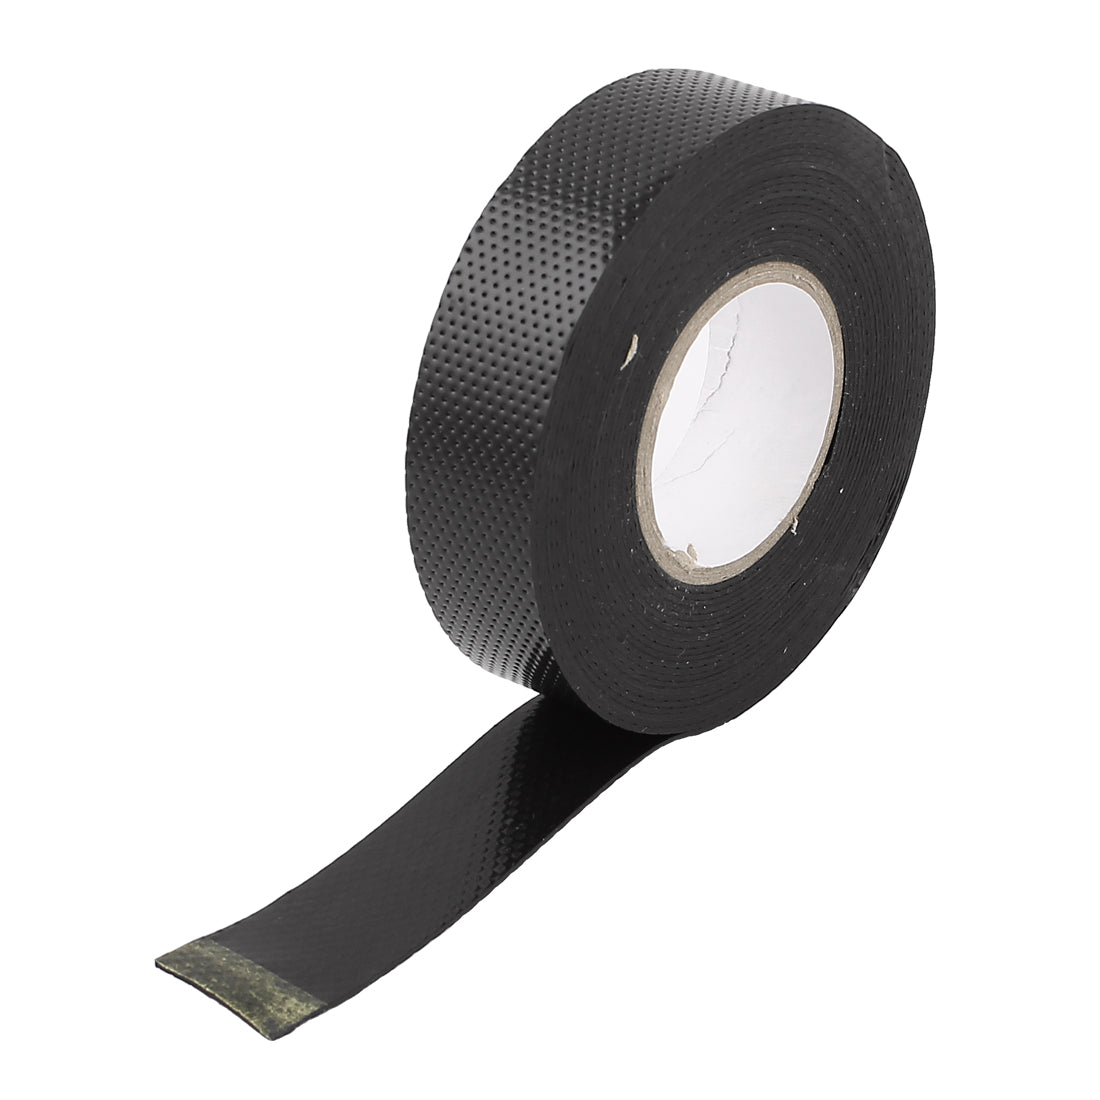 uxcell Uxcell Black Rubber Self Adhesive High Voltage Insulation Electrical Tape 5M Meters